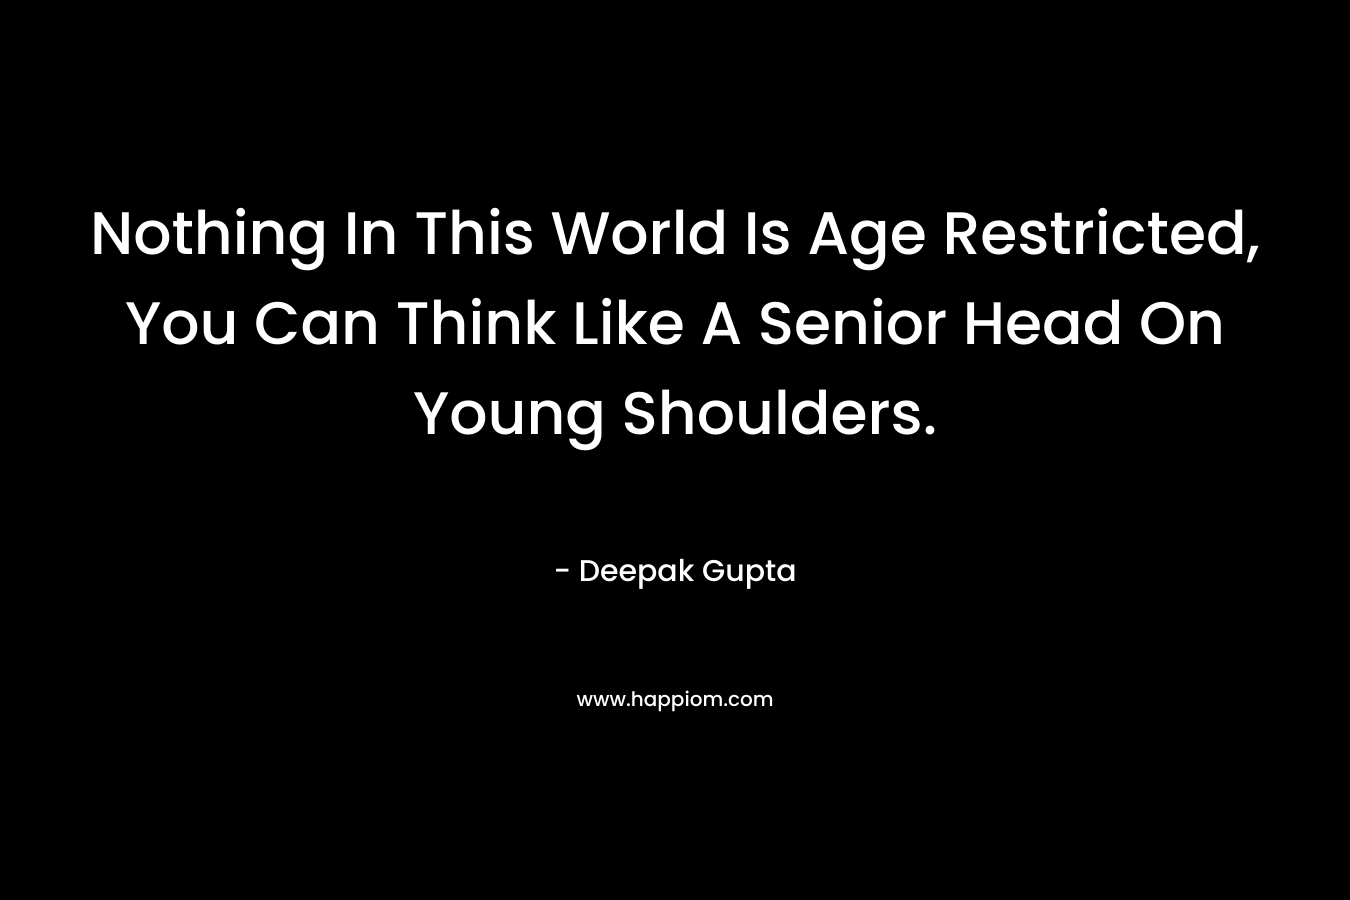 Nothing In This World Is Age Restricted, You Can Think Like A Senior Head On Young Shoulders. – Deepak Gupta